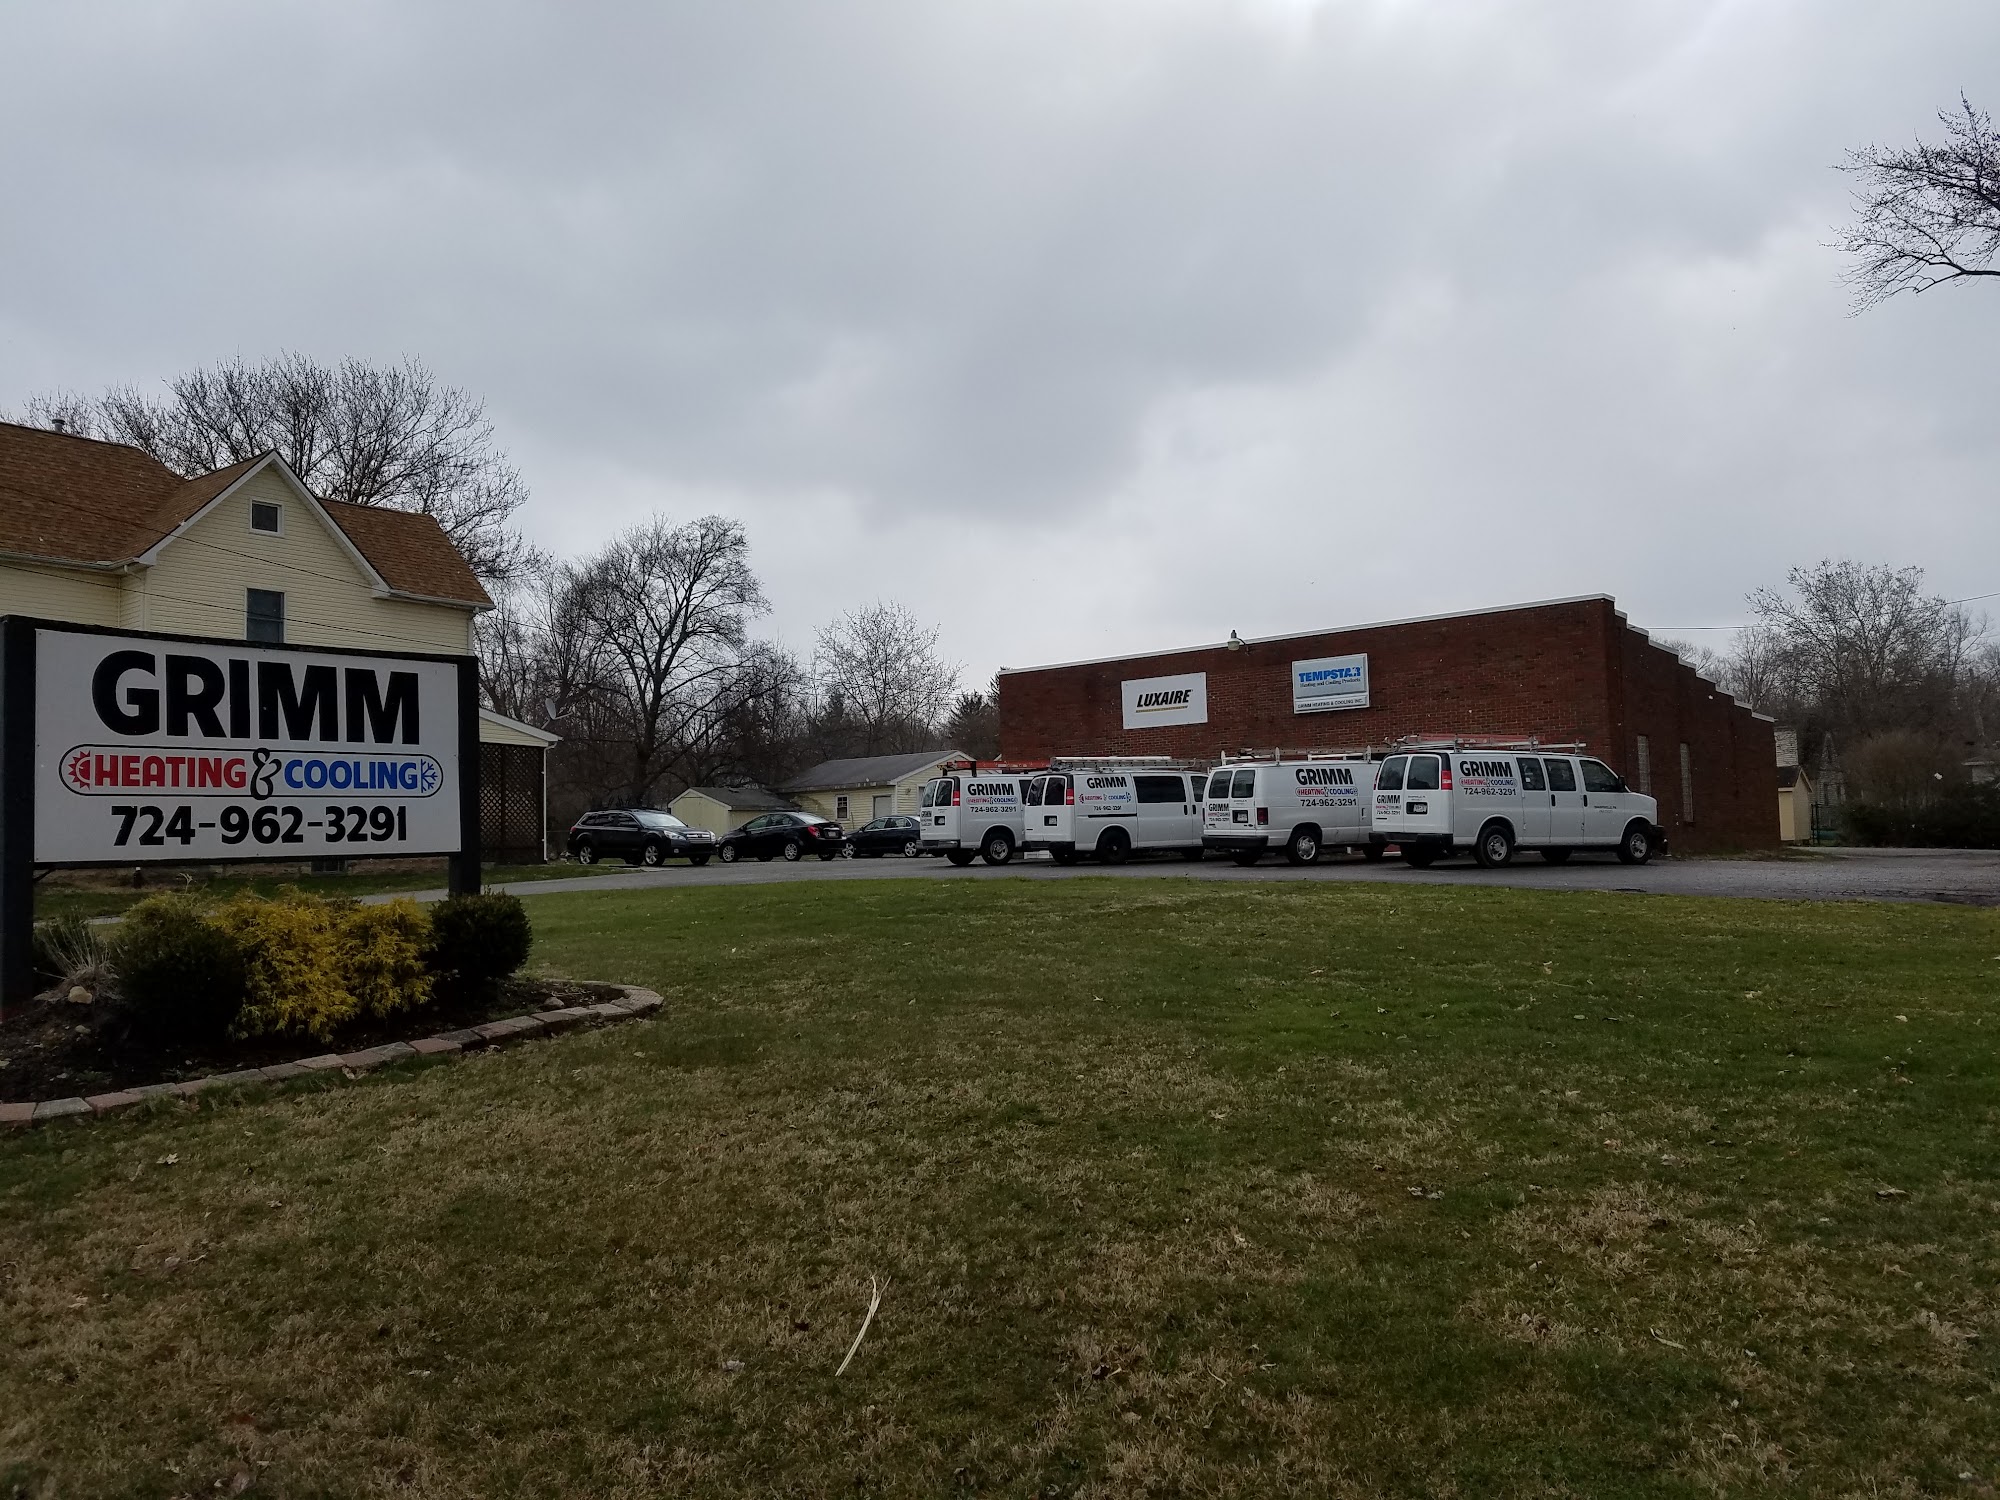 Grimm Heating & Cooling Inc